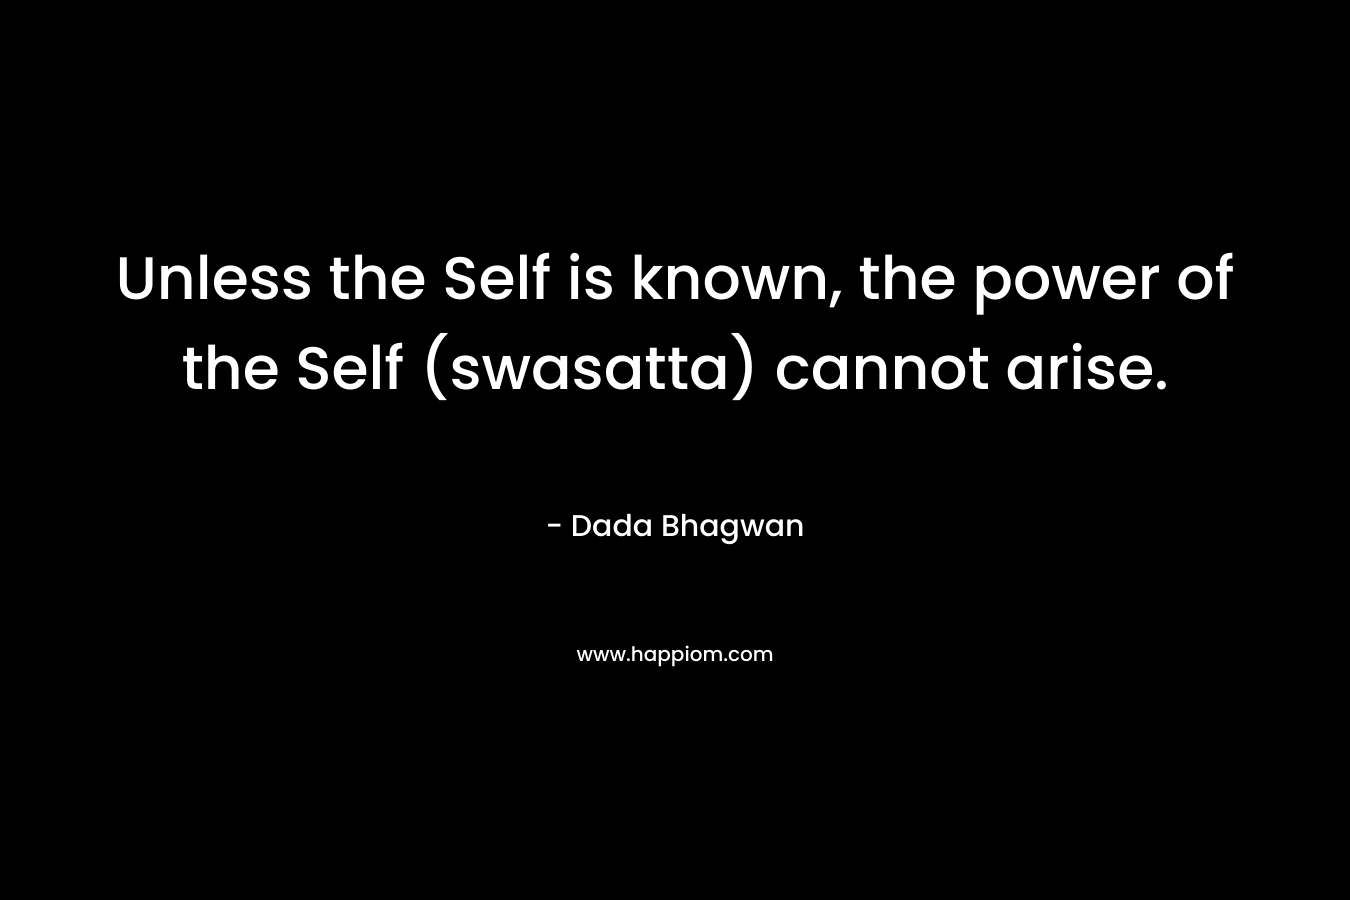 Unless the Self is known, the power of the Self (swasatta) cannot arise. – Dada Bhagwan